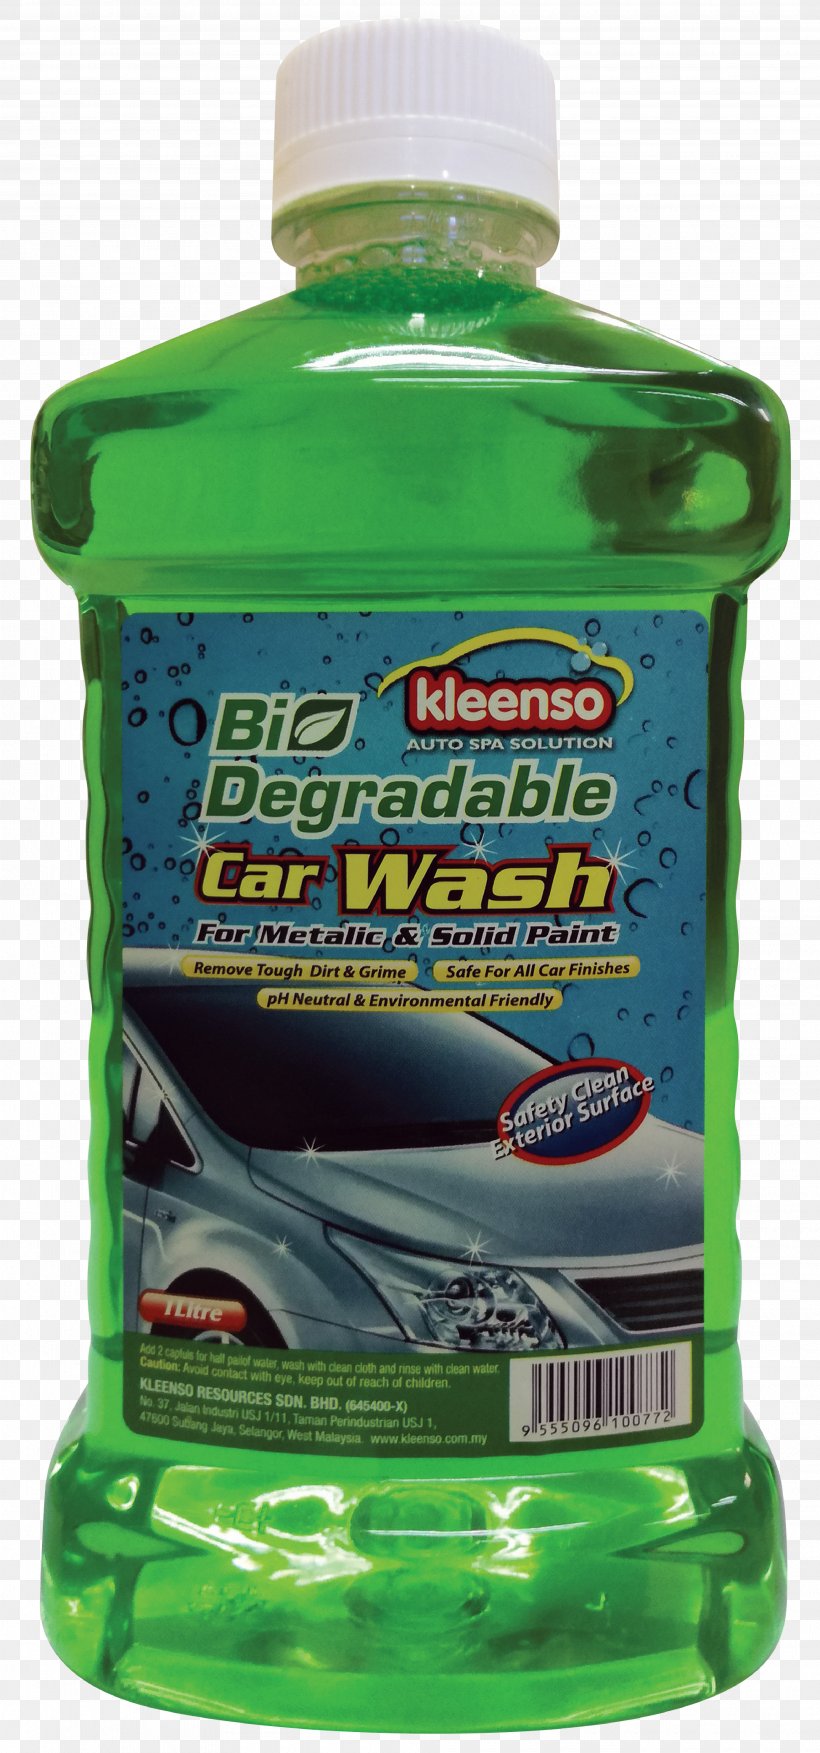 Car Wash Cleaning Washing Kleenso Resources Sdn. Bhd., PNG, 3750x8019px, Car, Automotive Fluid, Biodegradation, Car Wash, Cleaning Download Free